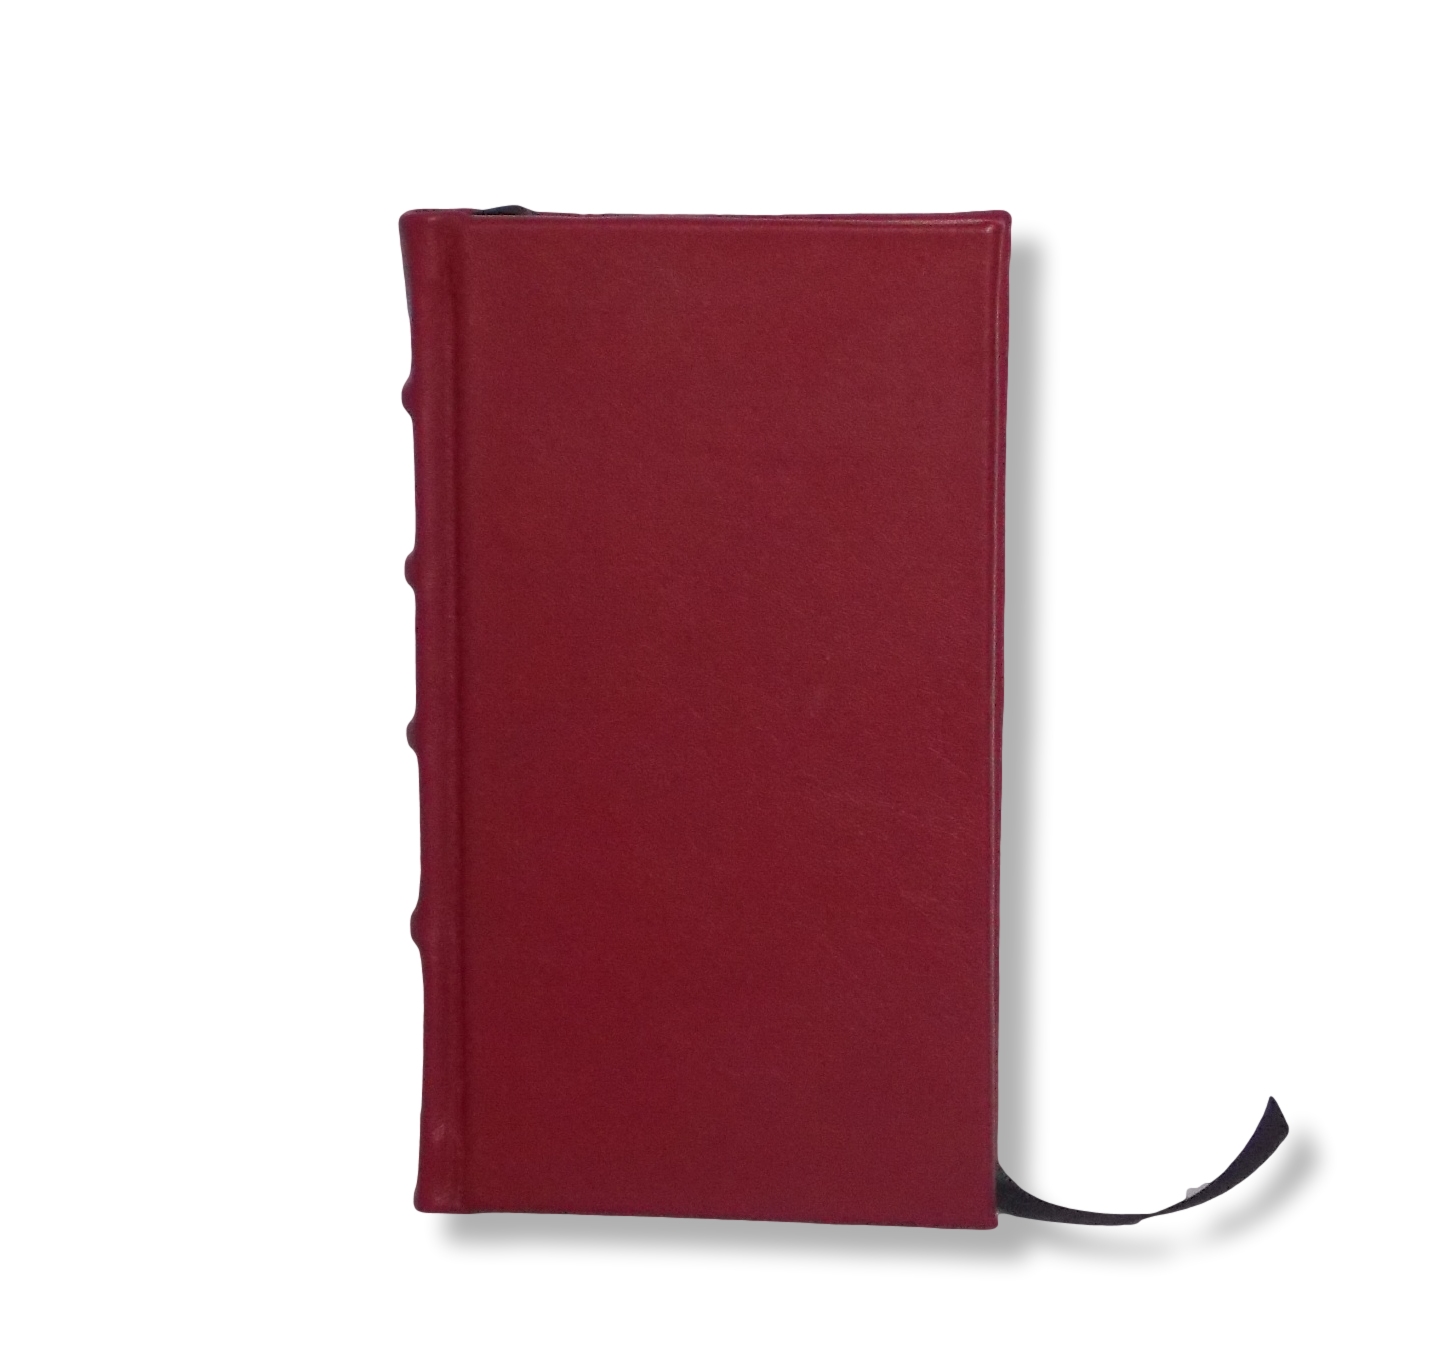 Slimline Leather Journal in Red